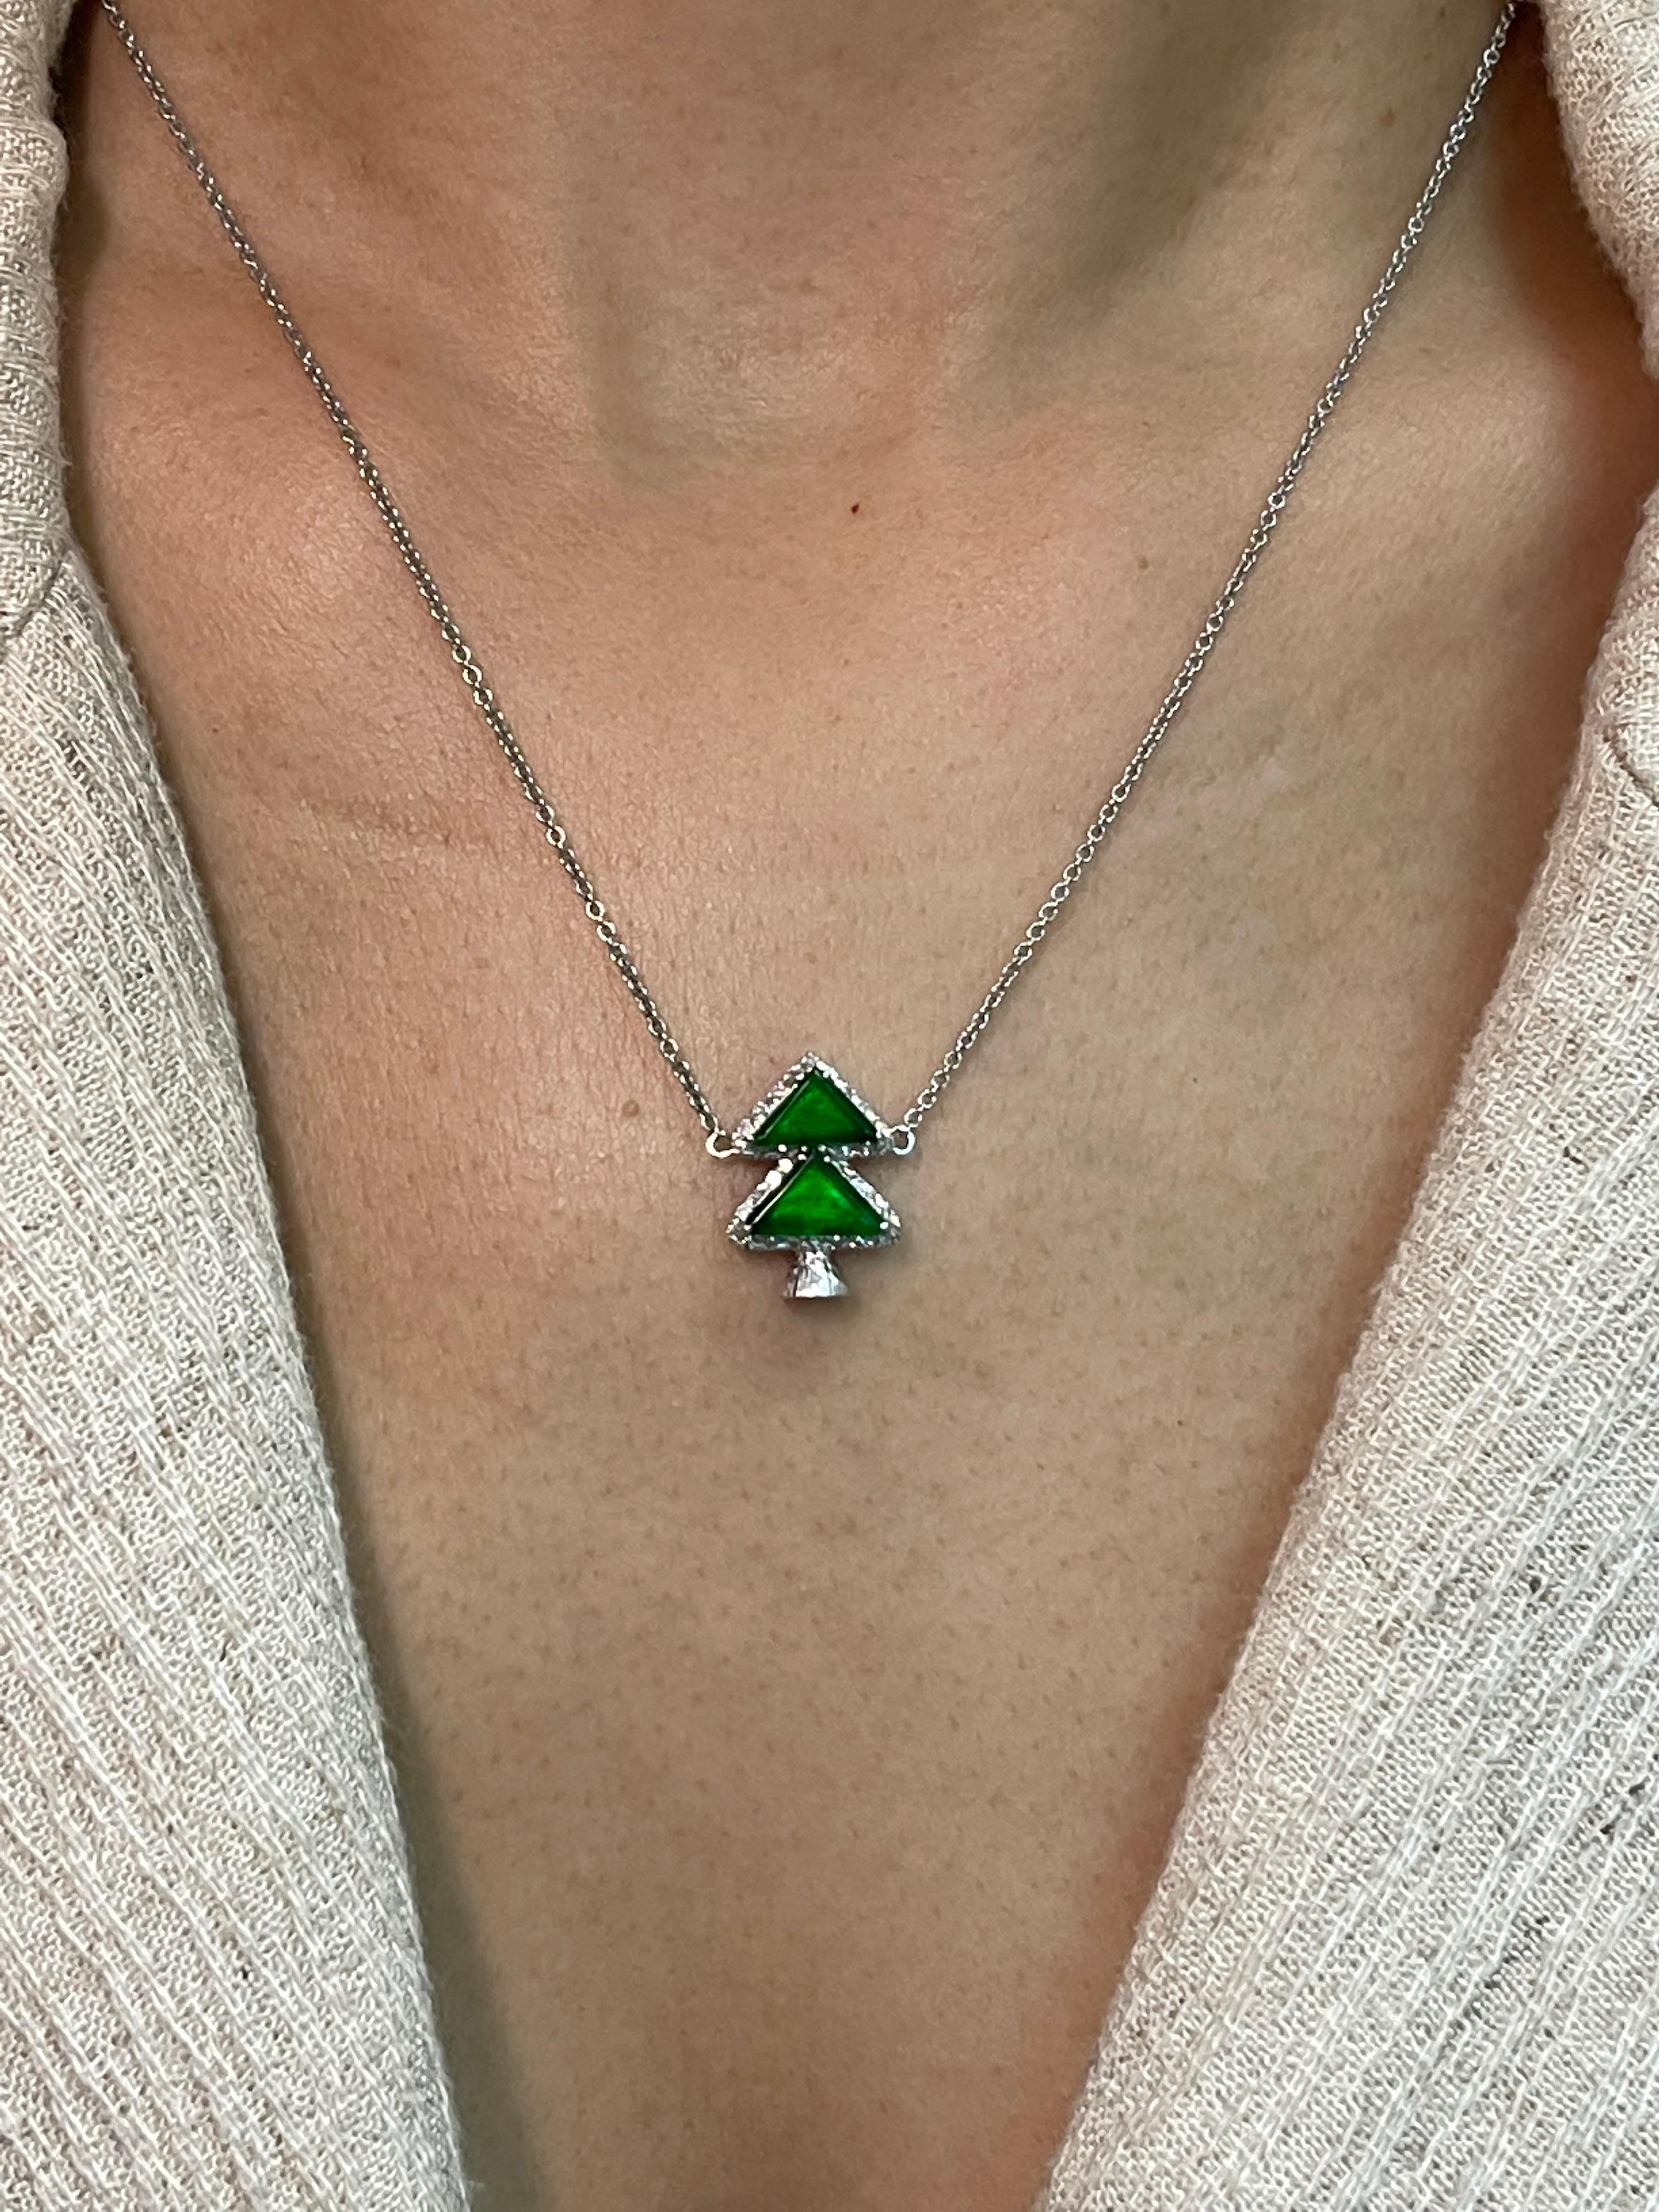 Natural jade that glows are rare and in high demand. This is certified by 2 labs to be natural jadeite jade. The pendant is set in 18k white gold and diamonds. There are a total of 0.15 cts of diamonds in this setting. Two apple green triangle jade